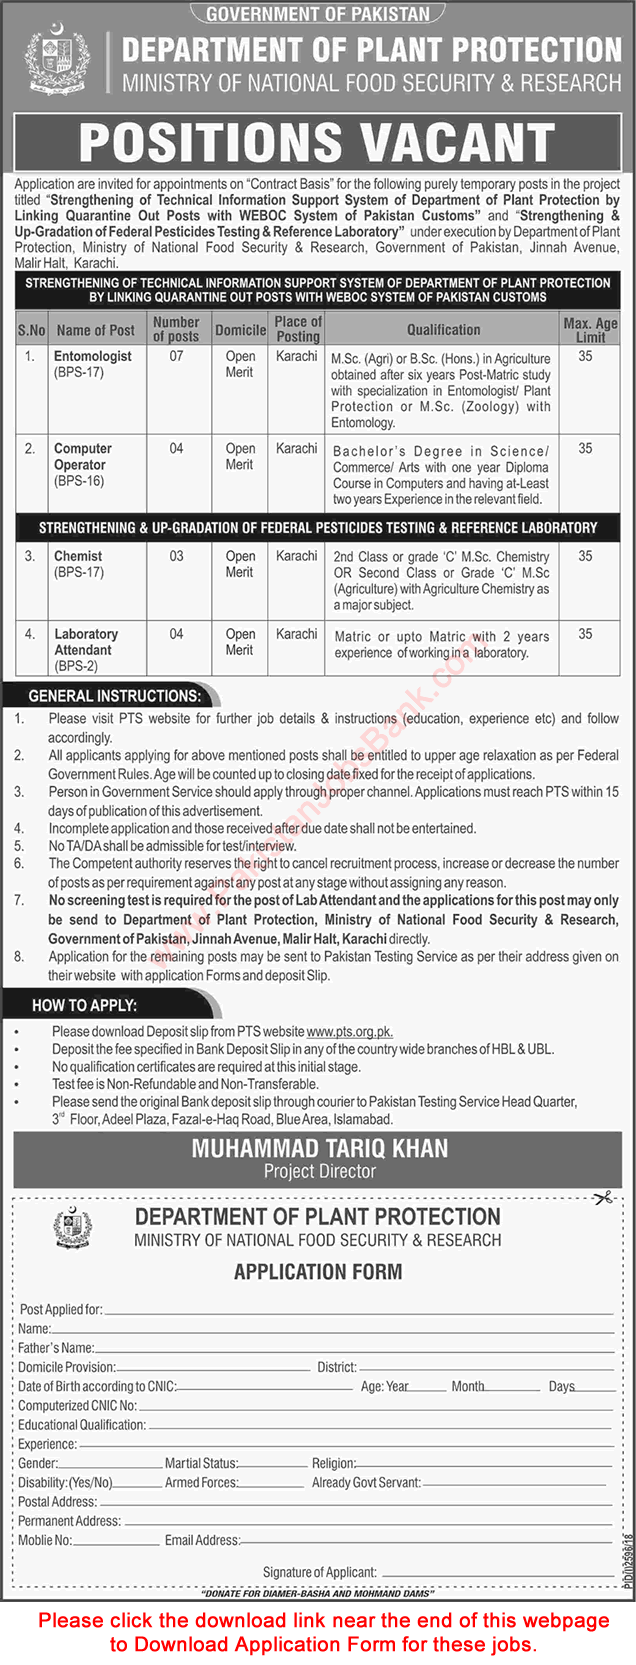 Department of Plant Protection Jobs 2018 Karachi PTS Application Form Ministry of National Food Security and Research (MNFSR) Latest